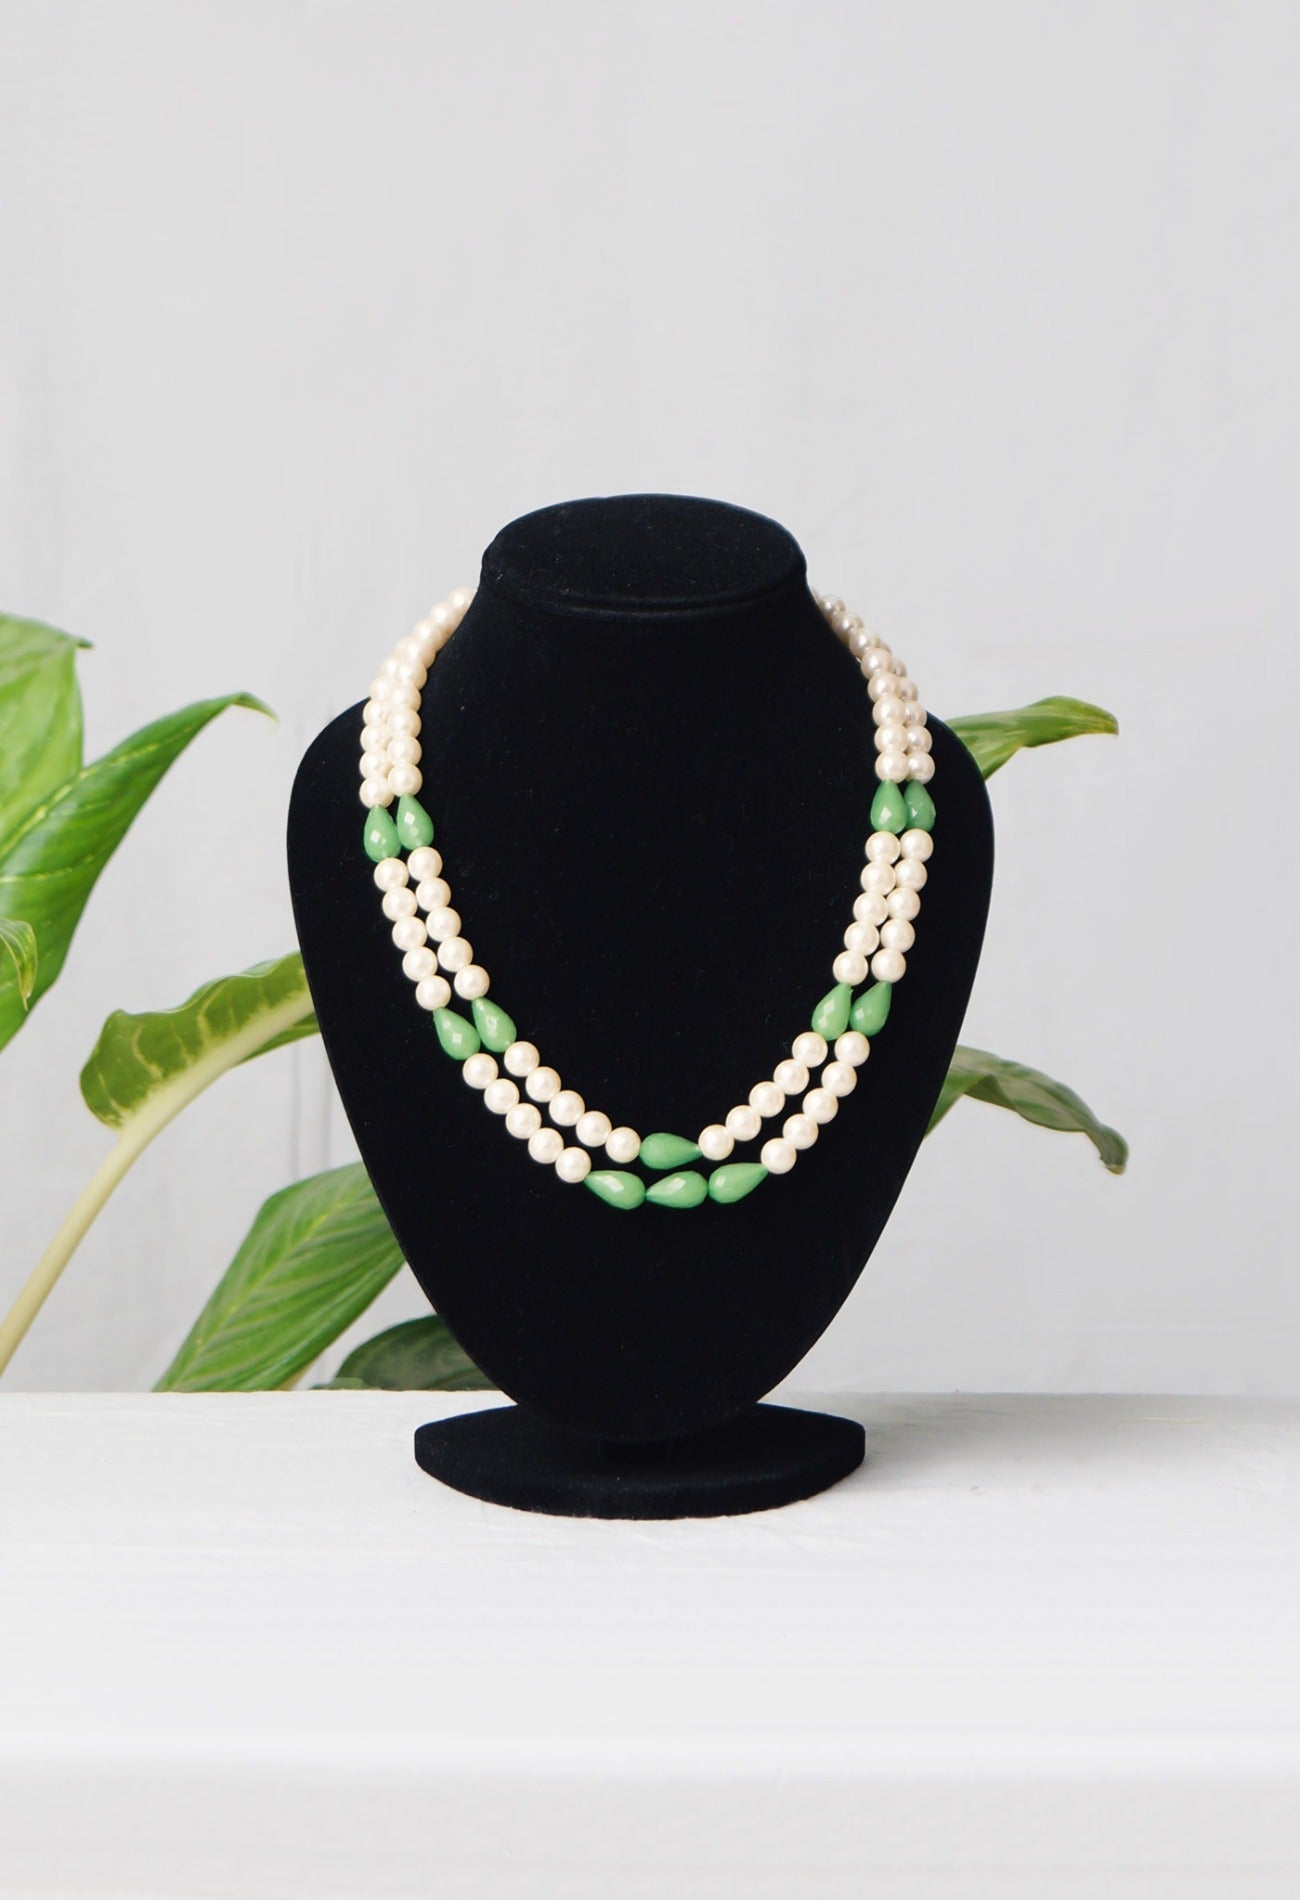 Online Shopping for White and Green Amravati Pearls Beads with jewellery from Andhra Pradesh at Unnatisilks.com India
